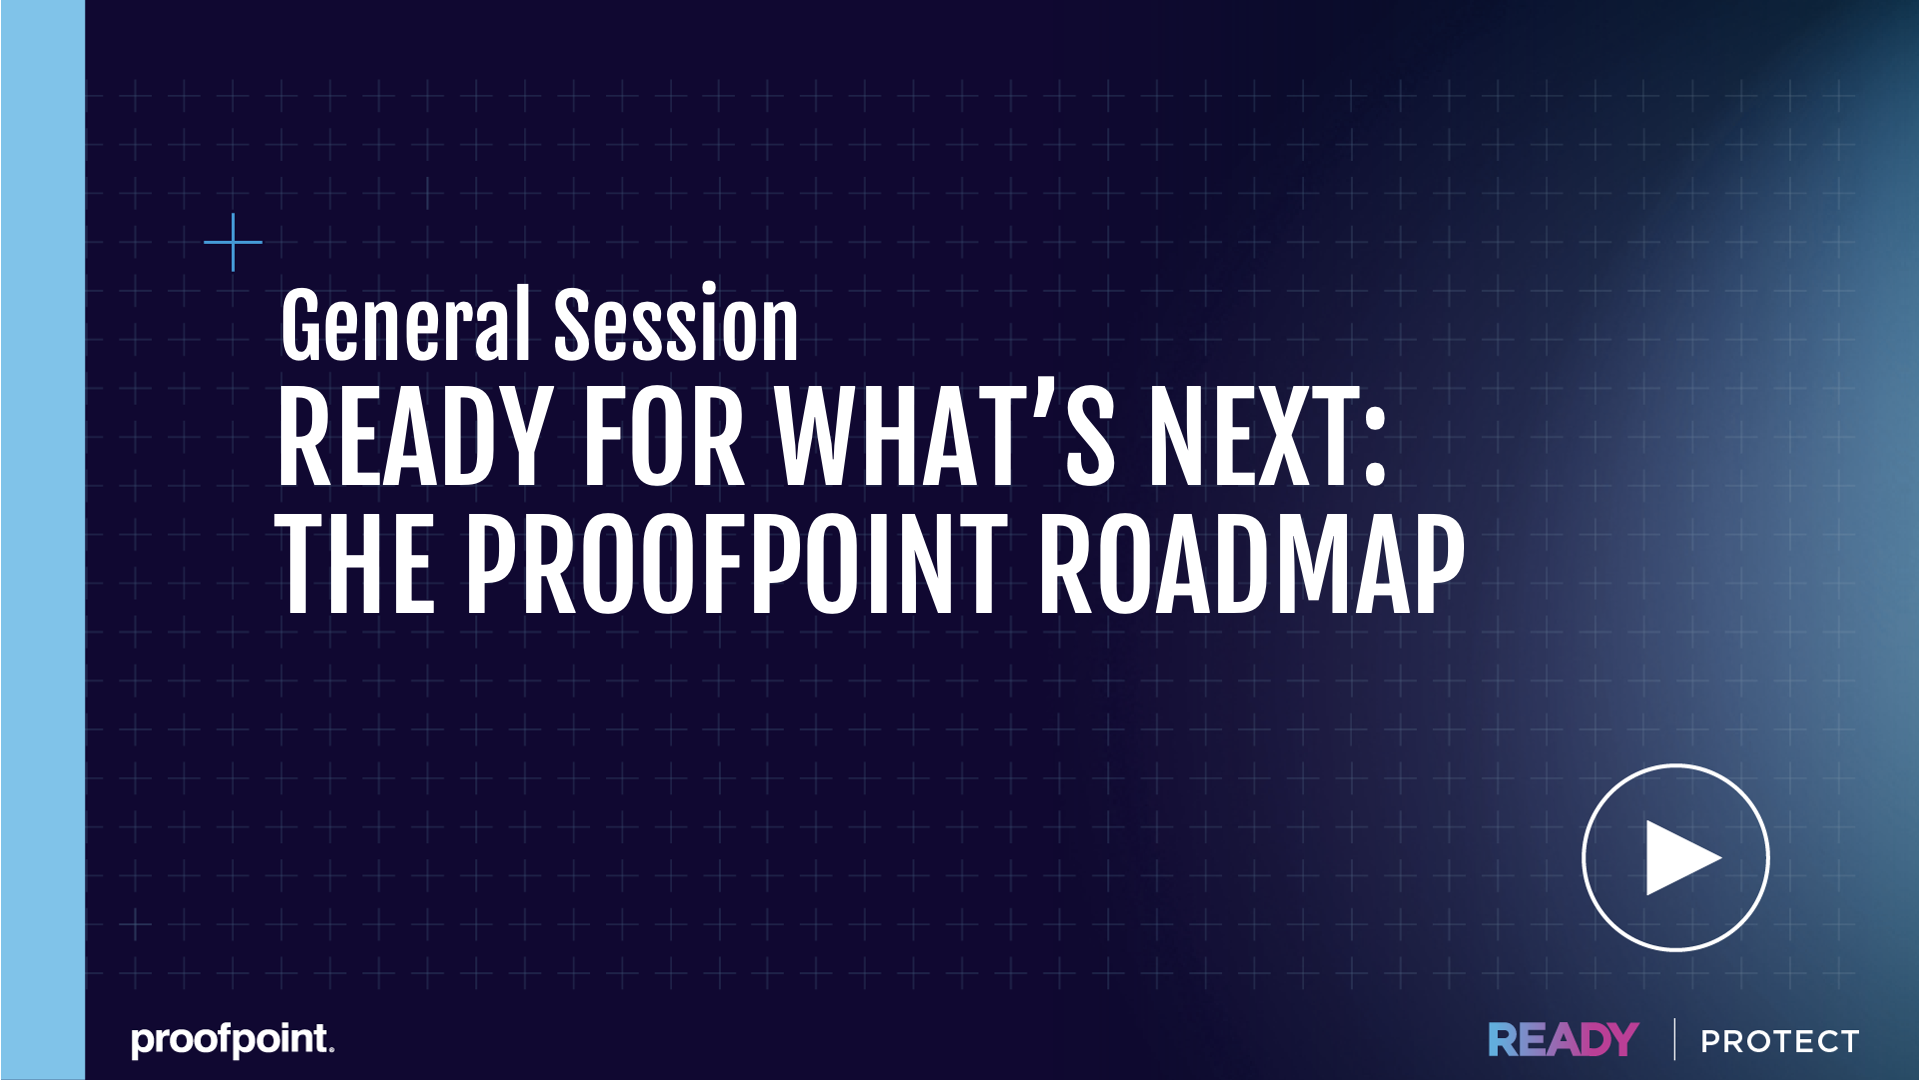 Ready for What's Next: The Proofpoint Roadmap